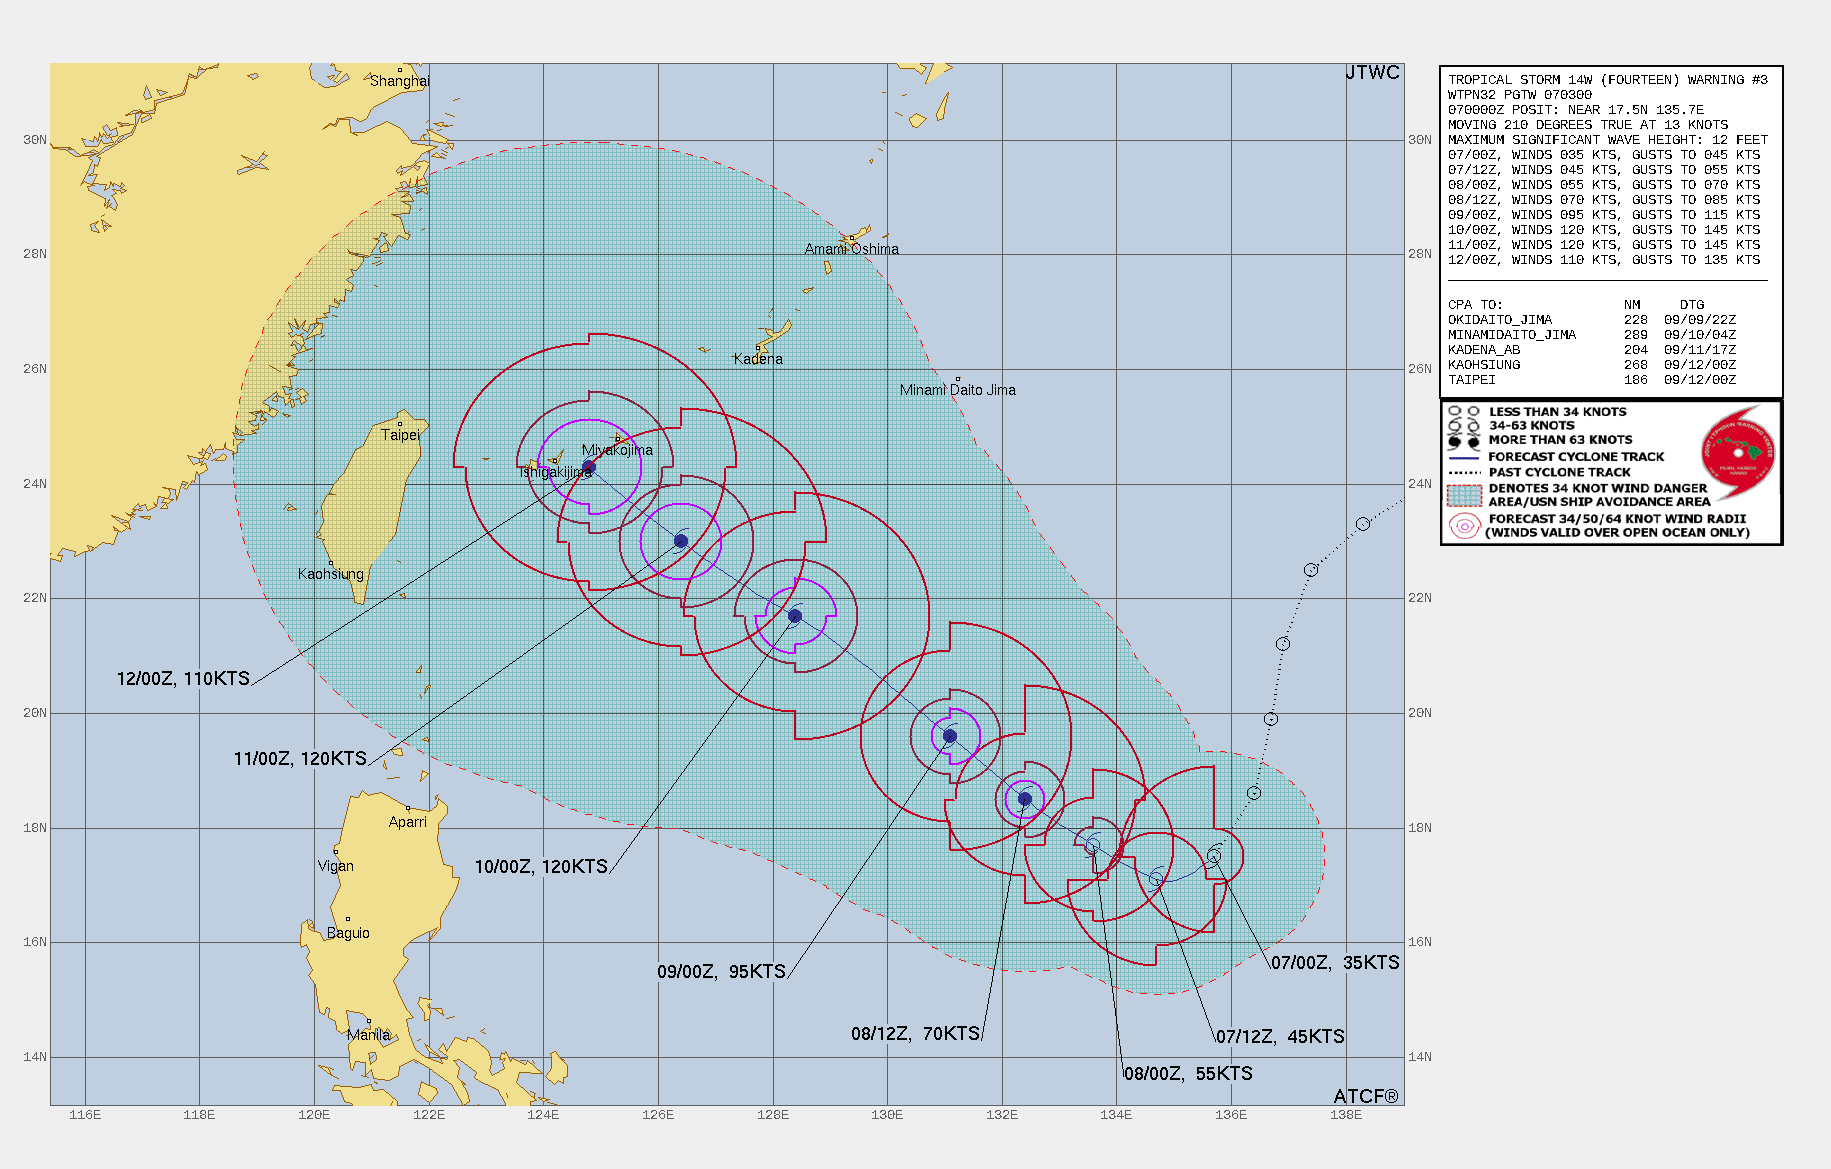 FORECAST REASONING.  SIGNIFICANT FORECAST CHANGES: THERE ARE NO SIGNIFICANT CHANGES TO THE FORECAST FROM THE PREVIOUS WARNING.  FORECAST DISCUSSION: TS 14W IS TRACKING SOUTHWESTWARD ALONG THE SOUTHEASTERN PERIPHERY OF THE SUBTROPICAL RIDGE (STR) POSITIONED TO  THE WEST, AND WILL GRADUALLY TURN WEST-SOUTHWESTWARD THROUGH TAU 12.  THE STR IS EXPECTED TO STRENGTHEN TO THE EAST AND REALIGN TO THE  NORTH WHICH WILL TURN THE SYSTEM WEST-NORTHWESTWARD TO NORTHWESTWARD  THROUGH TAU 120. A DEEP MIDLATITUDE SHORTWAVE TROUGH WILL DIG OVER  EASTERN CHINA AFTER TAU 96, WHICH COULD DRIVE THE SYSTEM MORE NORTHWESTWARD. TS 14W WILL STEADILY INTENSIFY THROUGH TAU 24 WITH RAPID INTENSIFICATION LIKELY FROM TAU 24 TO TAU 48 AS POLEWARD OUTFLOW IMPROVES AND THE SYSTEM TRACKS OVER WARM SST (30-31C) AND  VERY HIGH OCEAN HEAT CONTENT.